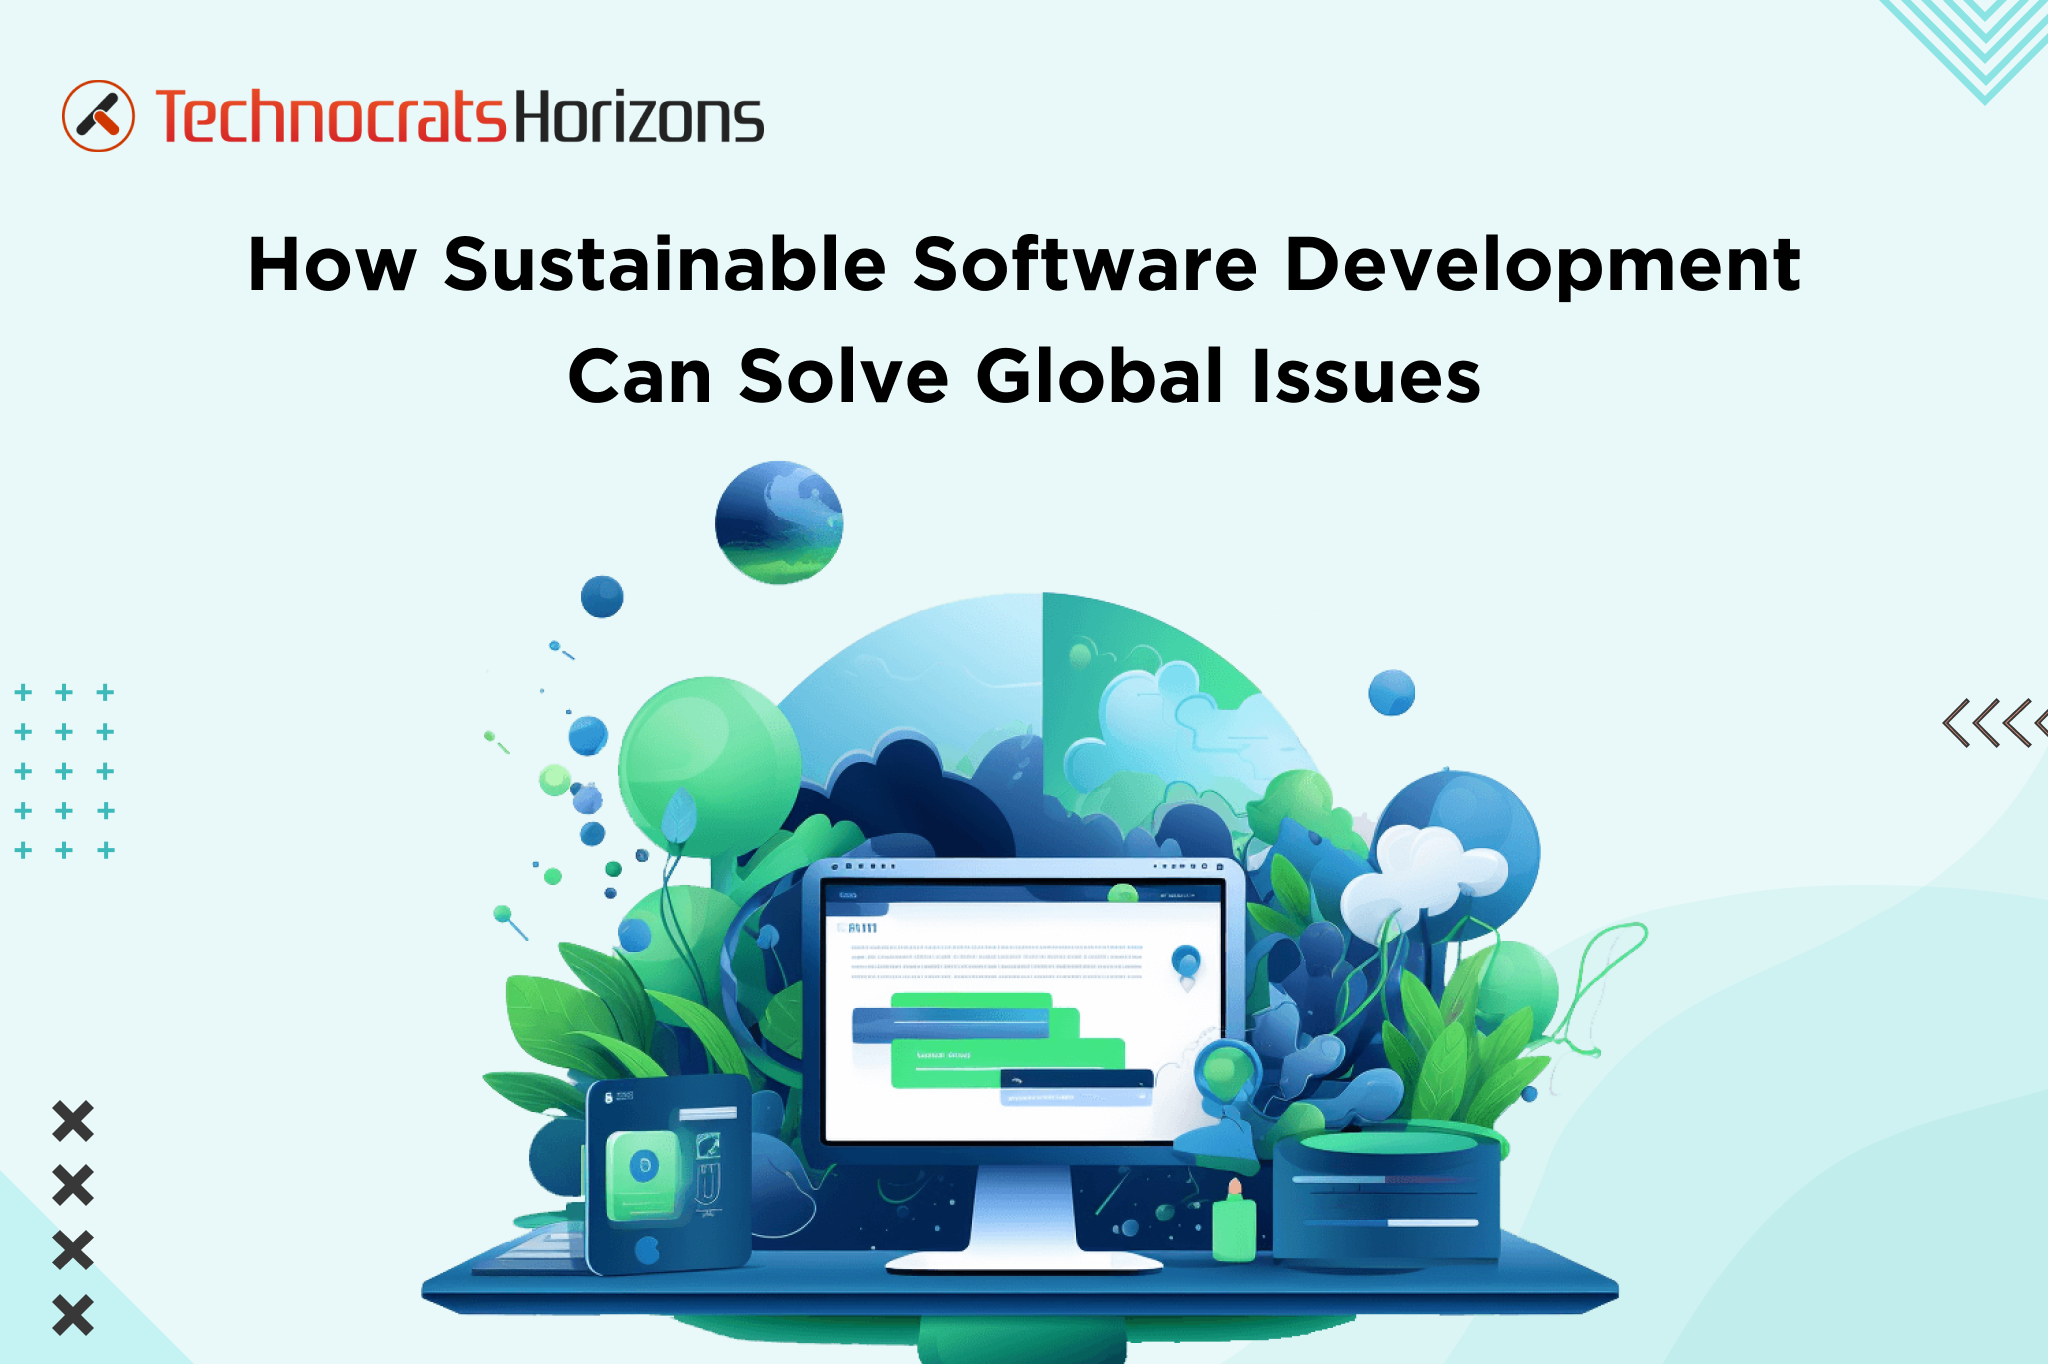 What Global Problems Can Be Solved With Sustainable Software Development